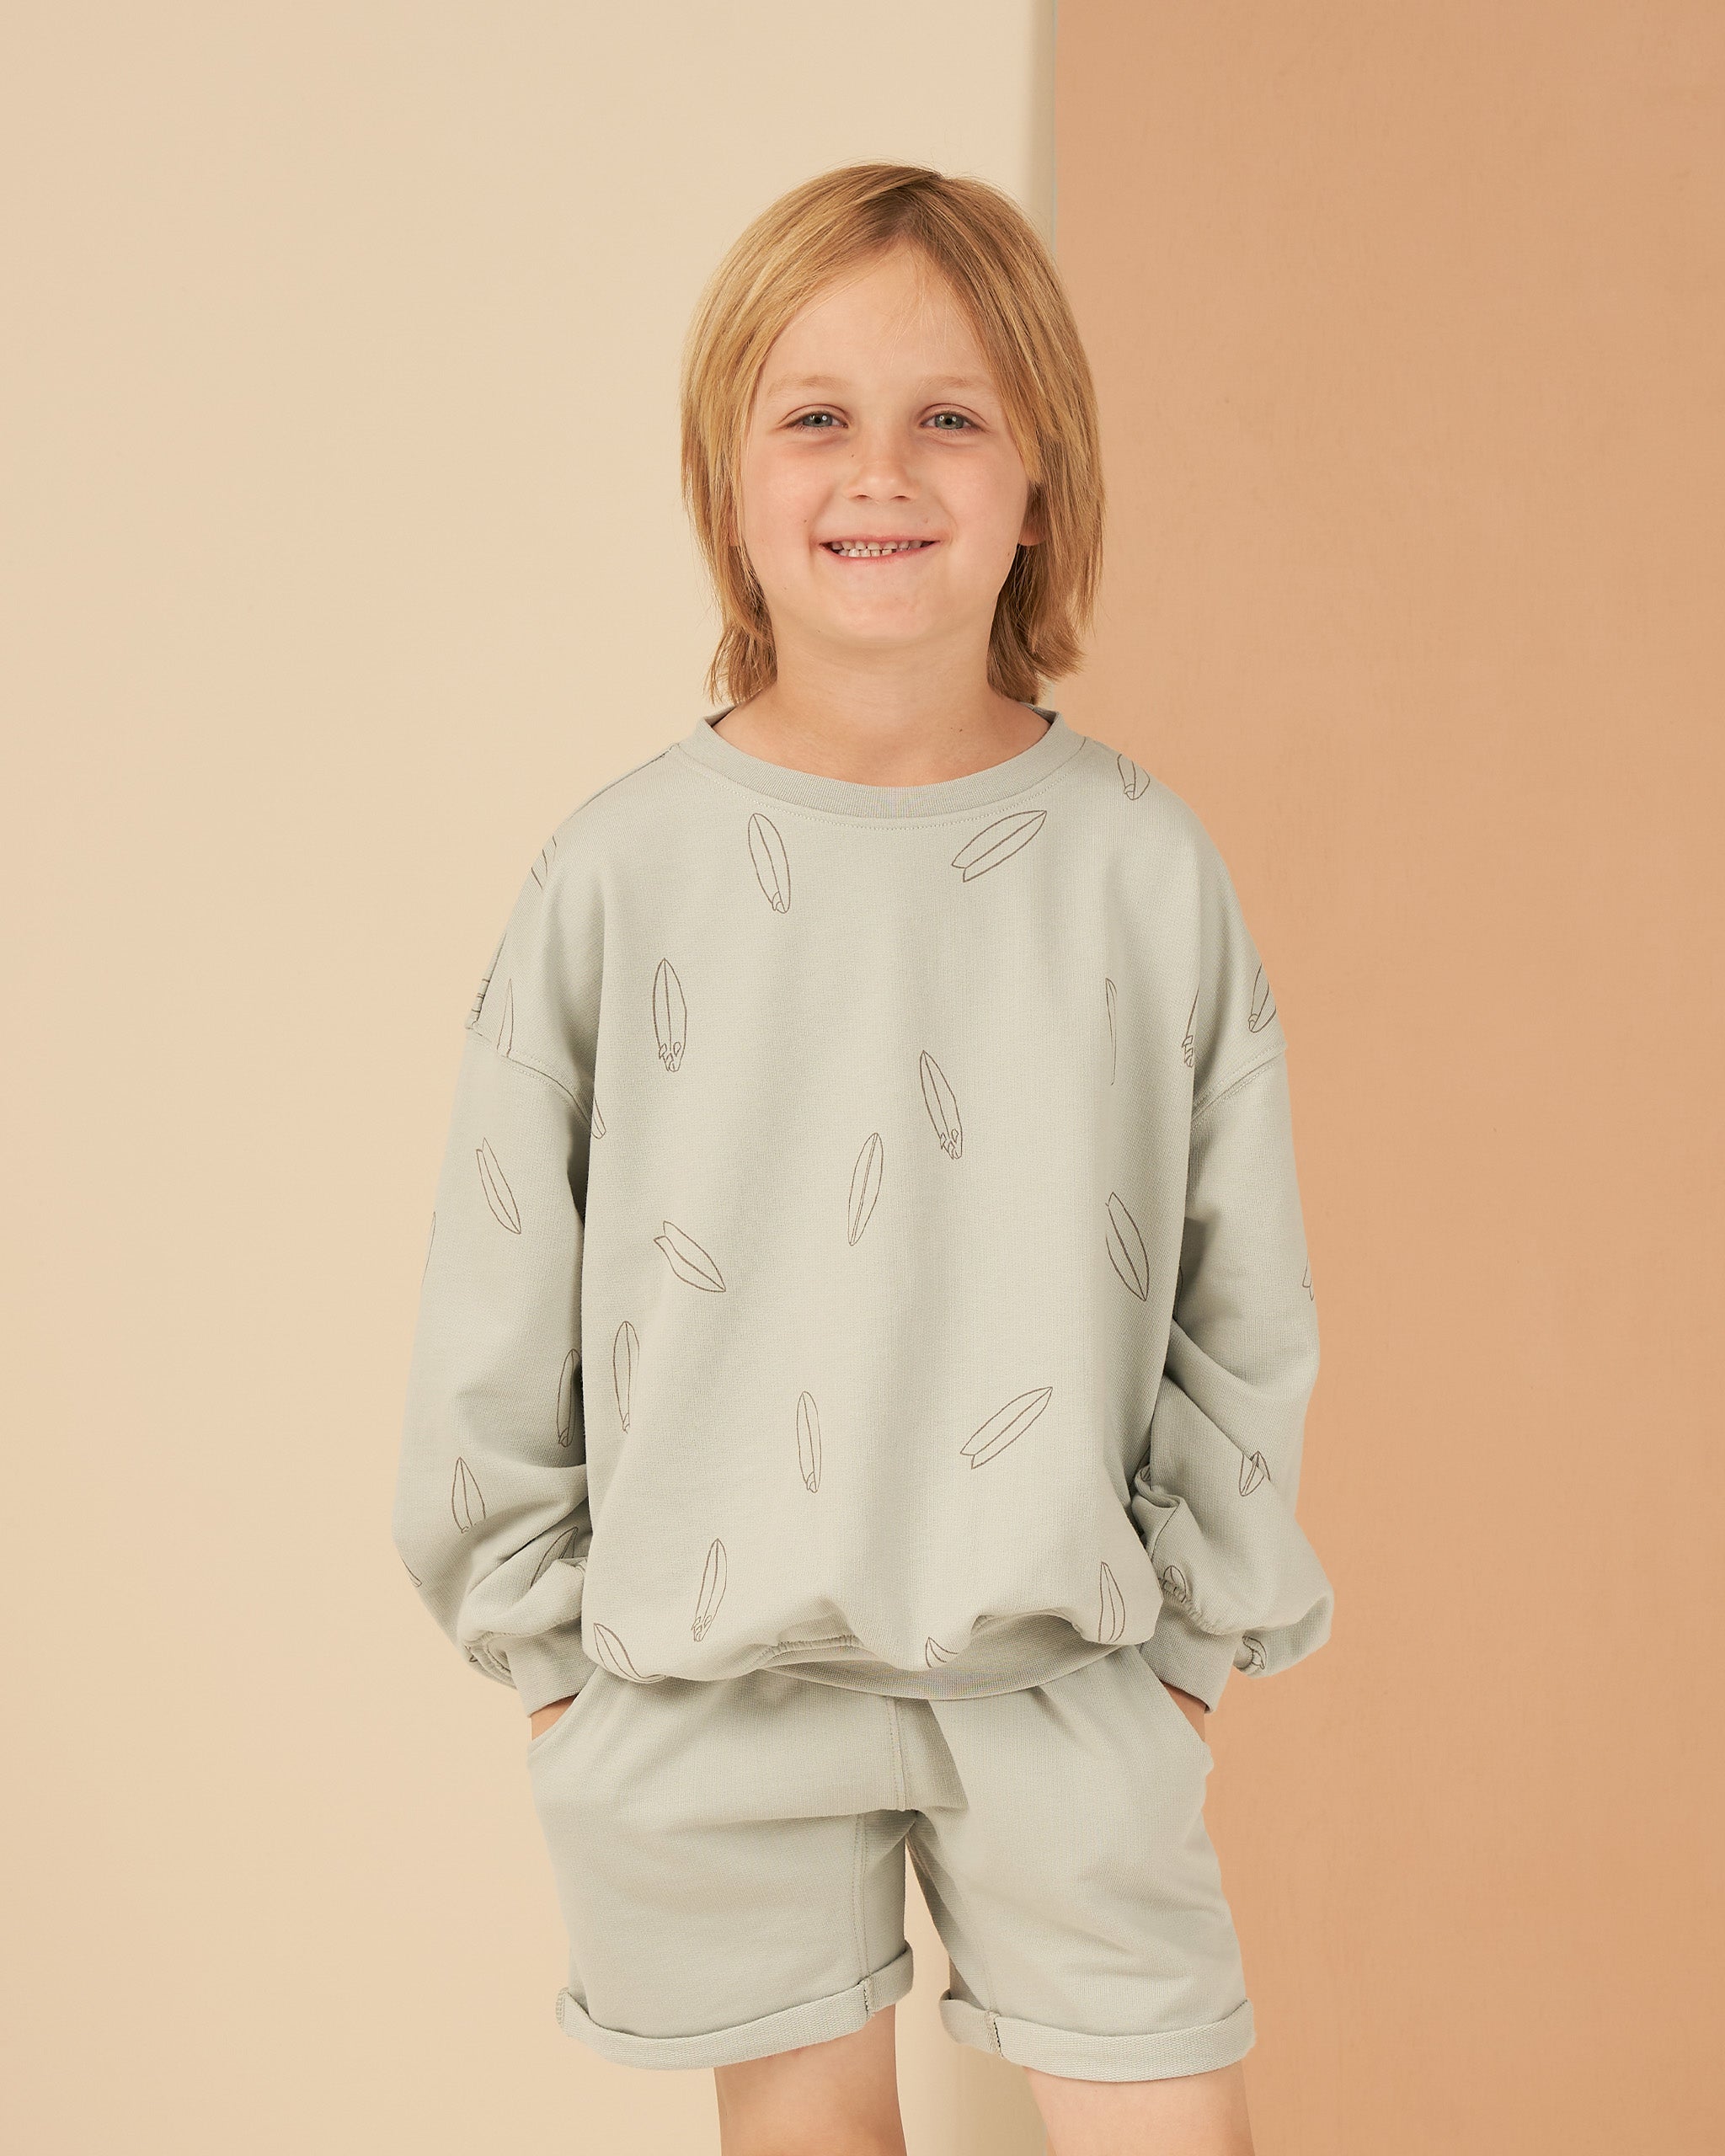 Sweatshirt || Surfboard - Rylee + Cru | Kids Clothes | Trendy Baby Clothes | Modern Infant Outfits |